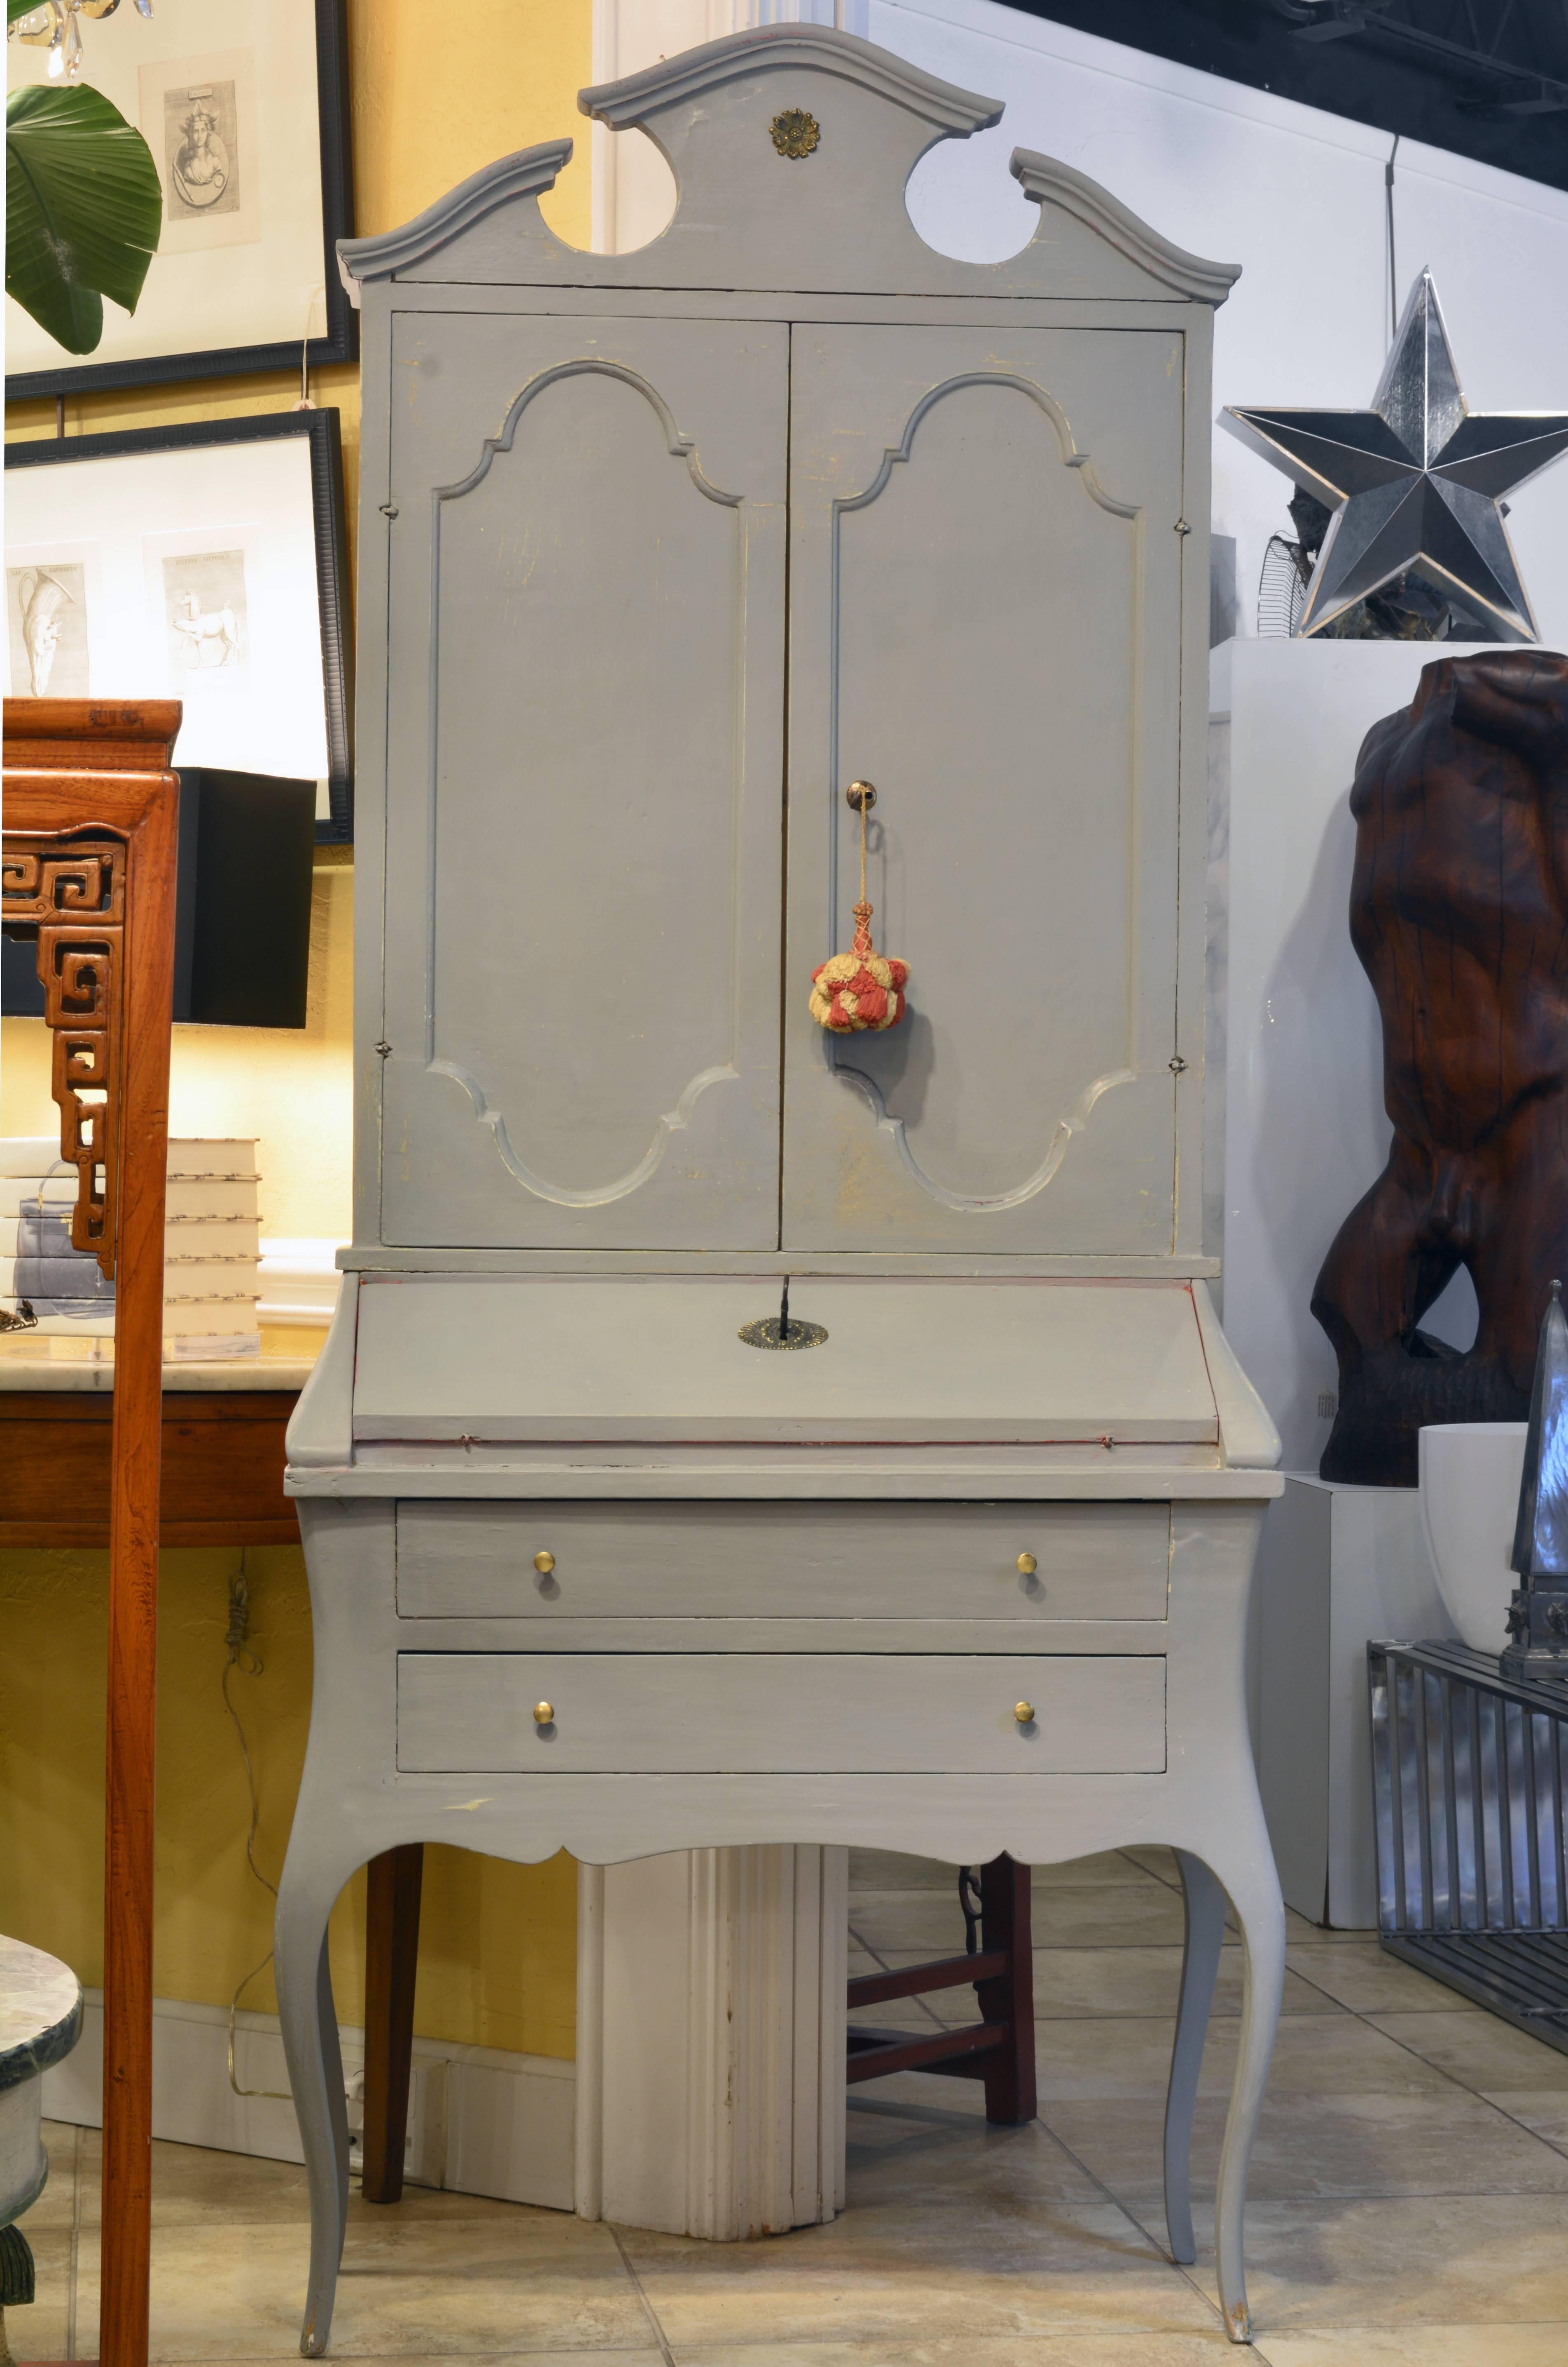 This fetching two part grey painted secretary desk features an upper cabinet crowned by shaped pediments above two-panel doors opening up to a shelved and paper lined interior. The lower part offers a slant front opening up to a Venetian red